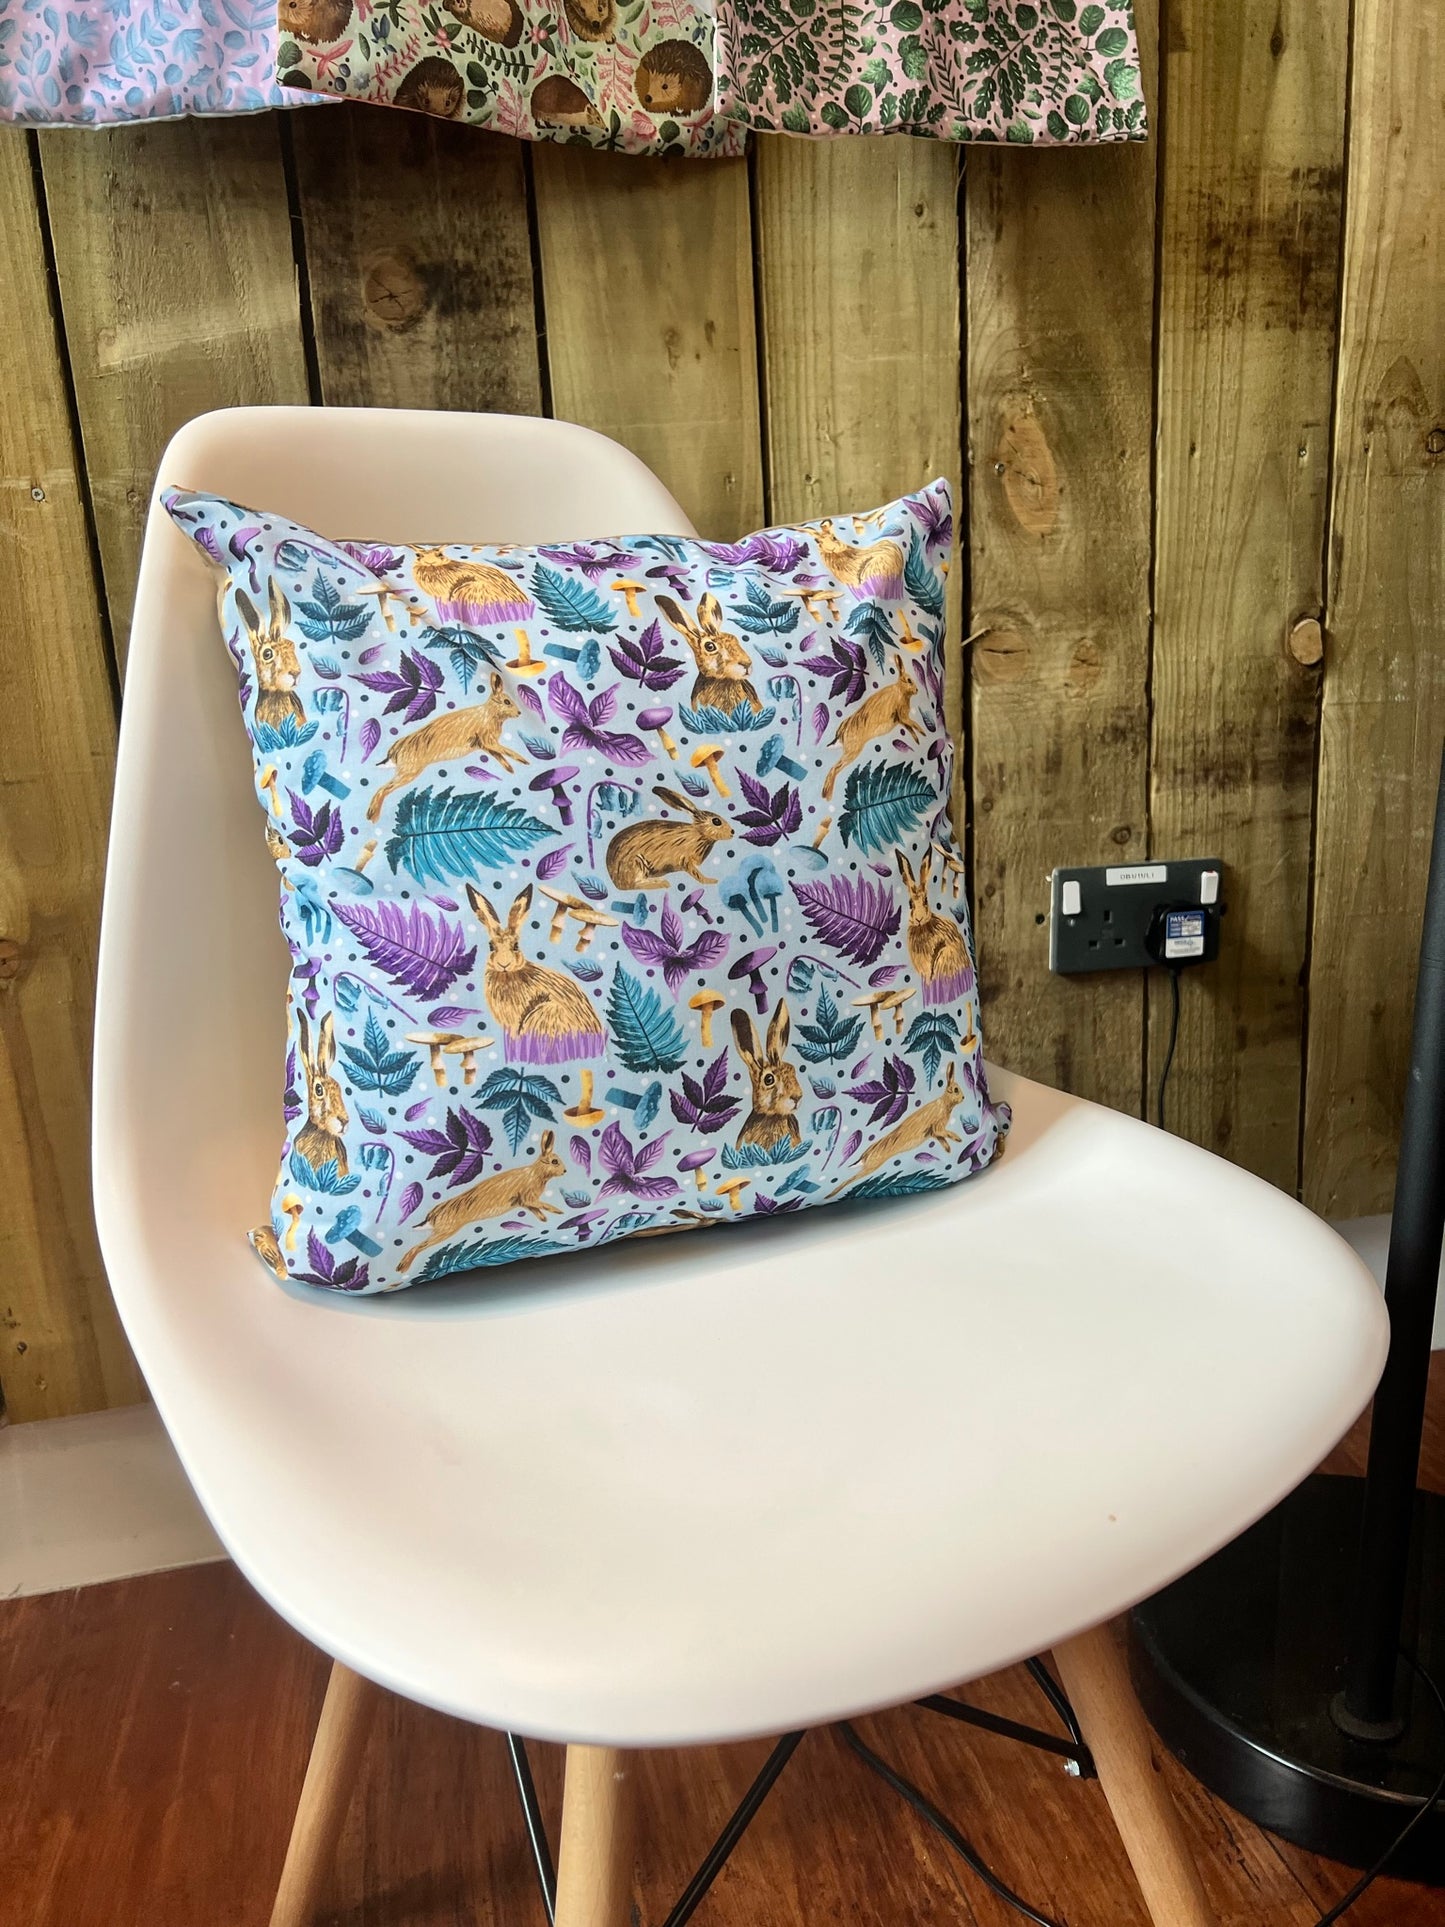 Our hare cushion cover is a fab rabbit gift for someone who loves the animals. It's shown here on a white chair with the bright blue pattern design. Ideal as a decorative pillow for a sofa